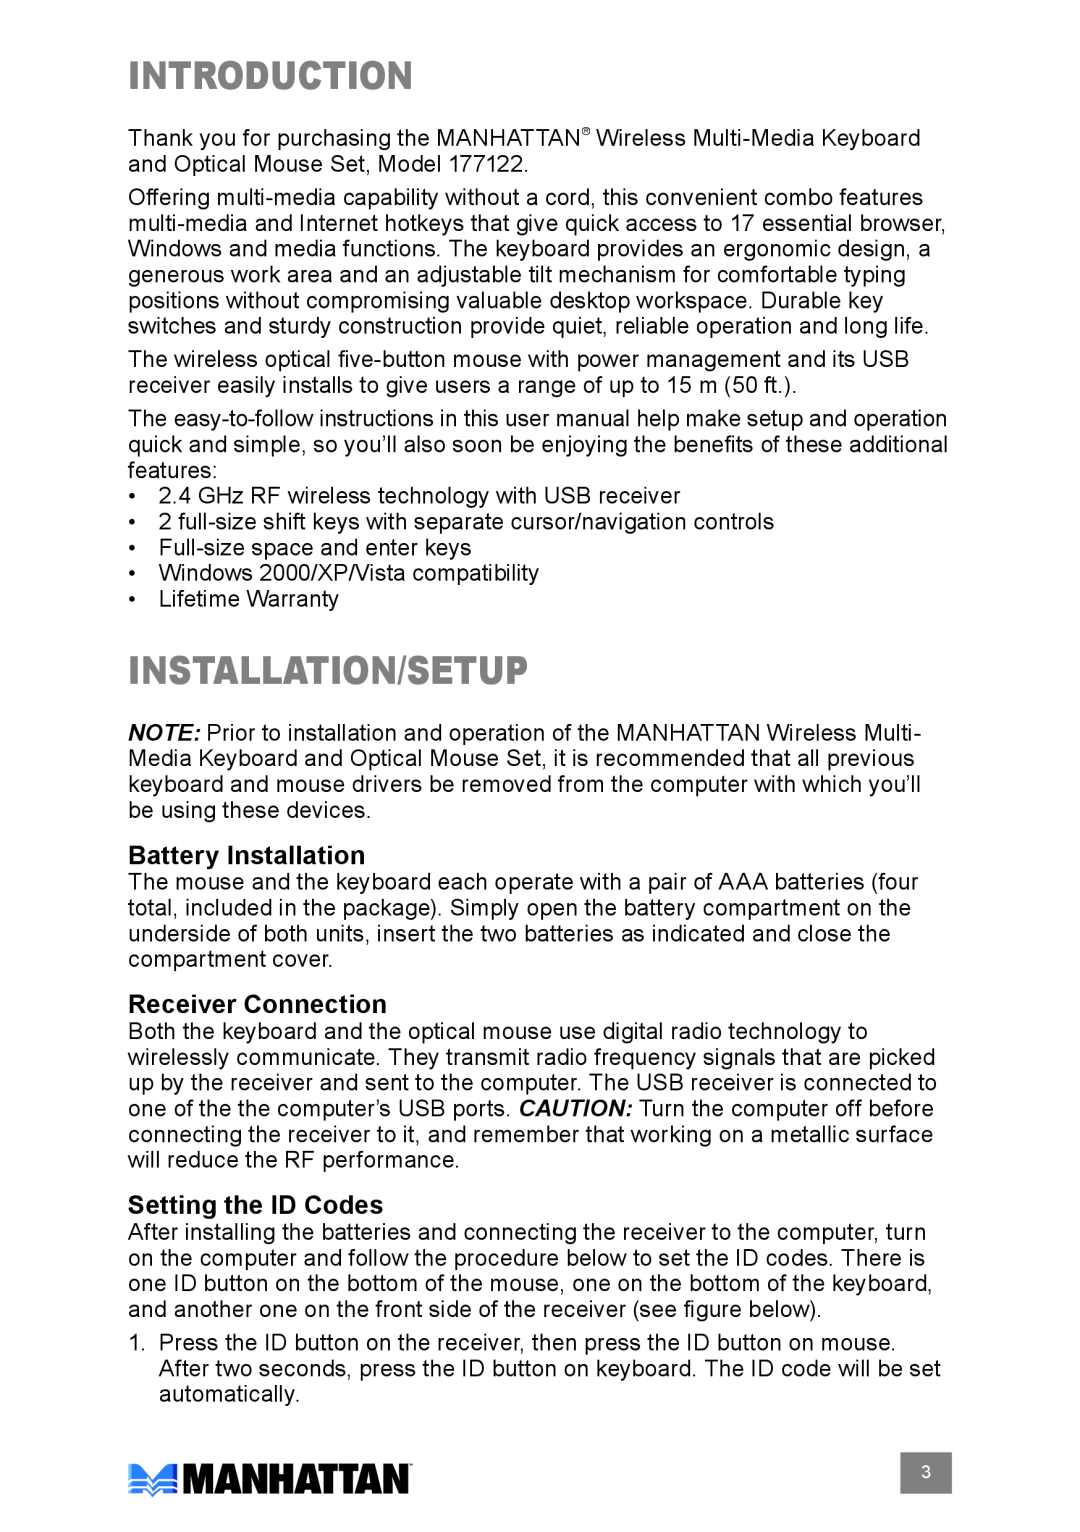 Manhattan Computer Products 177122 user manual introduction, installation/setup, Battery Installation, Receiver Connection 